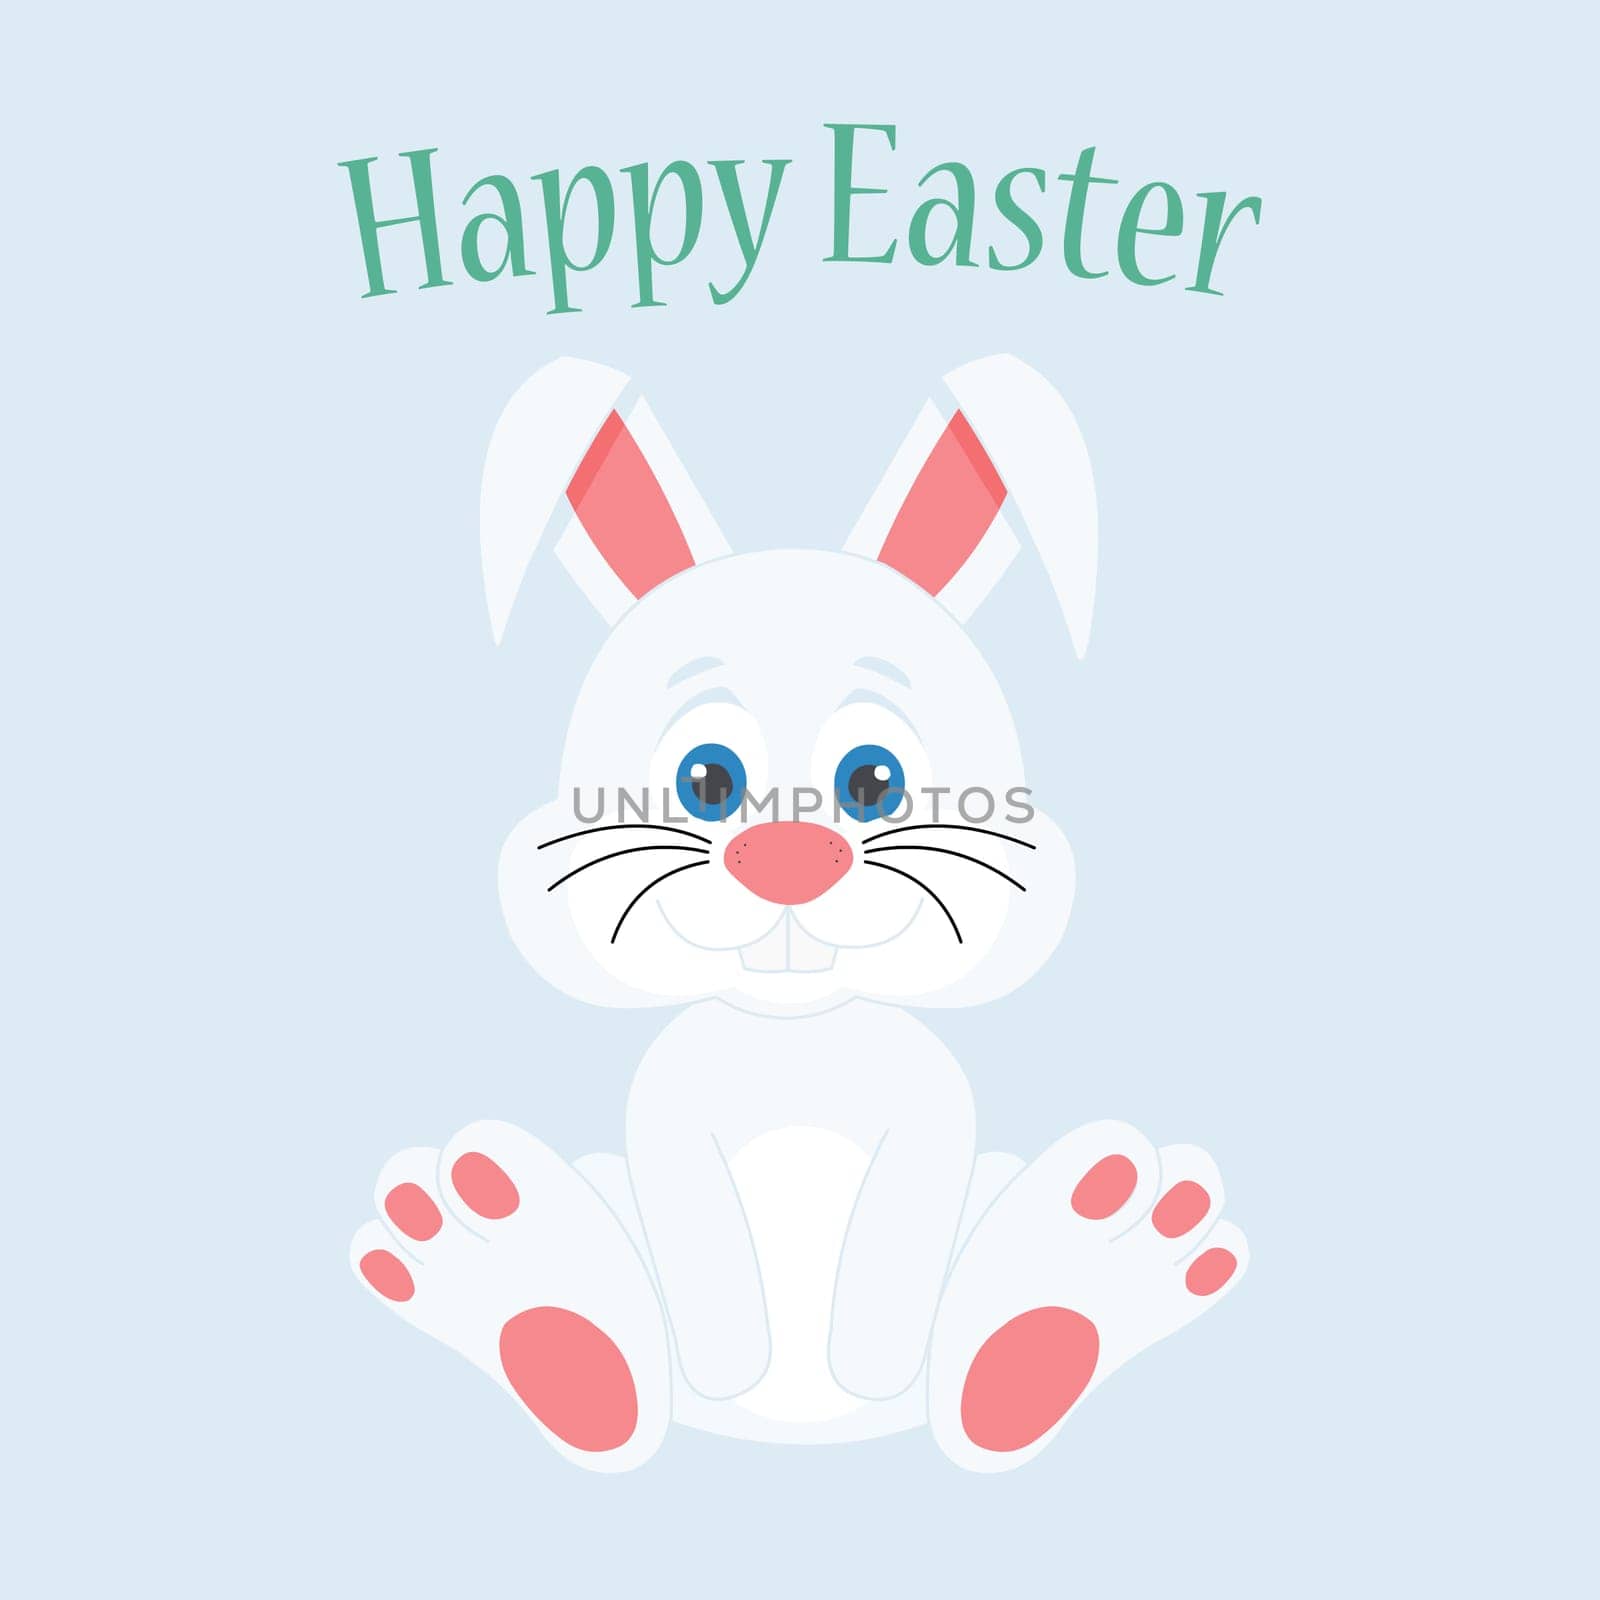 A cute easter bunny with the text "Happy Easter".